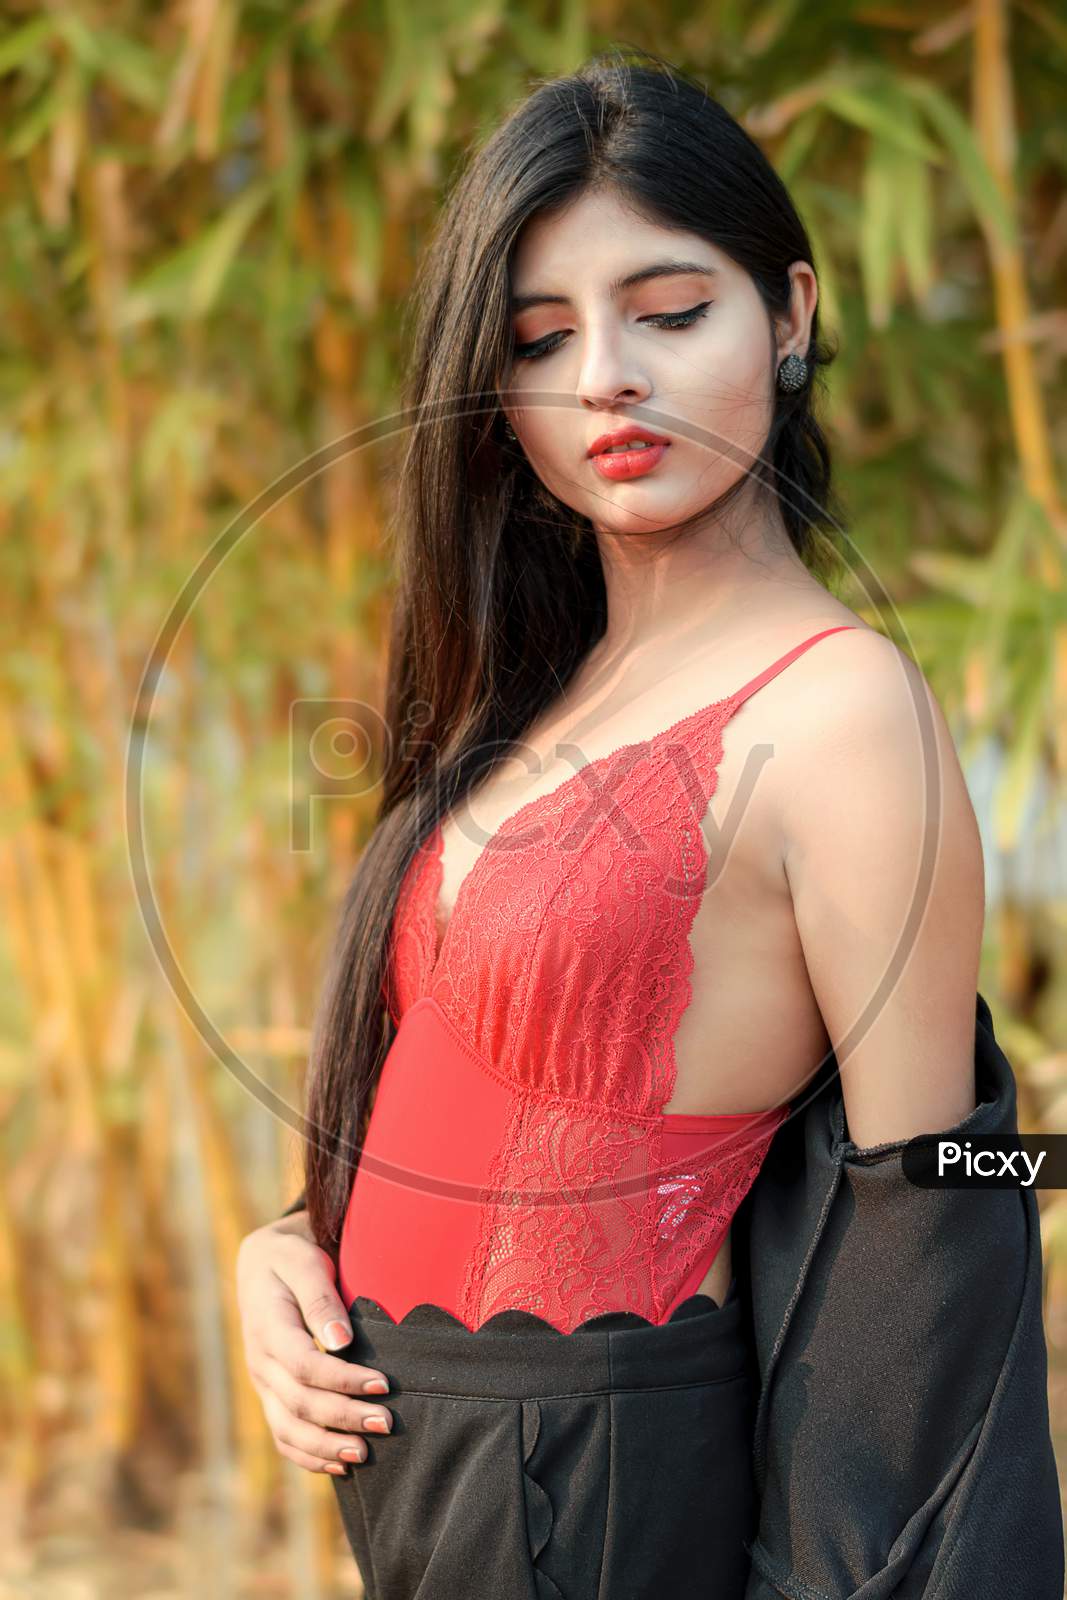 Portrait Of Very Beautiful Young Attractive Woman Wearing Red Outfit With Black Jacket Posing Fashionable In A Blurred Background. Lifestyle & Fashion.